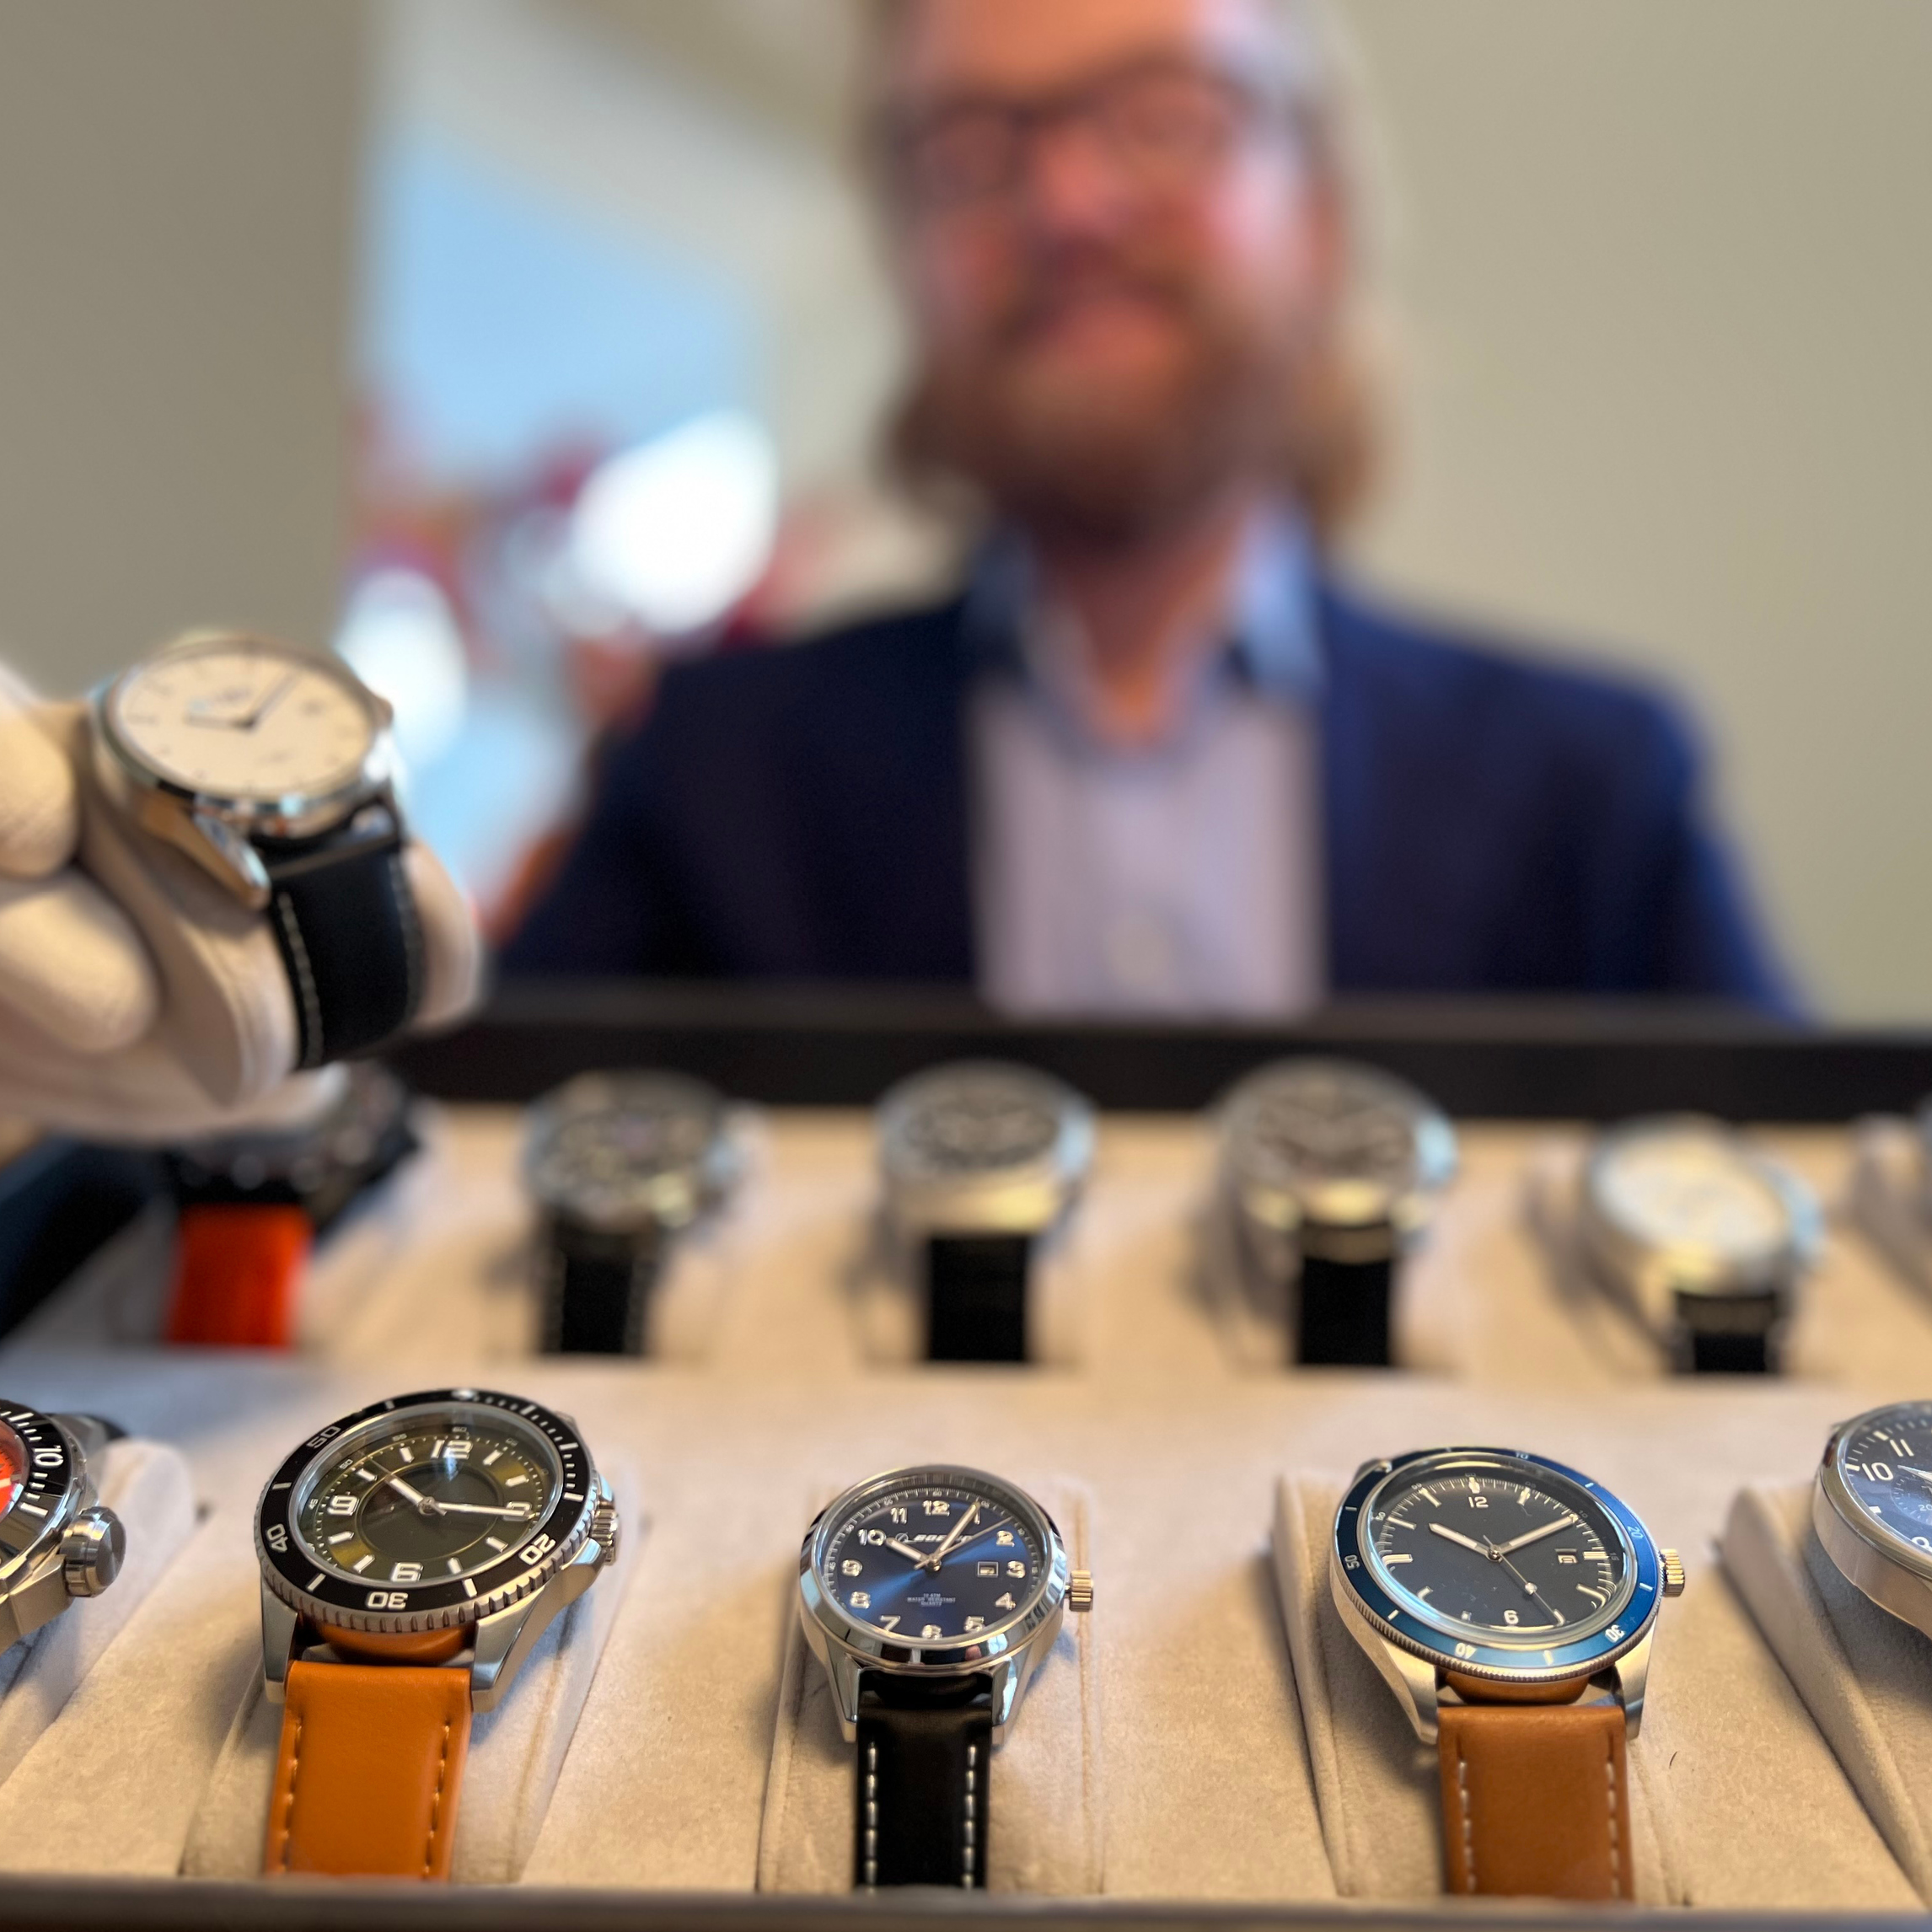 Watch Branding - Custom logo watches for corporate gifts and events - find your perfect fit with our expert advice and extensive range of styles